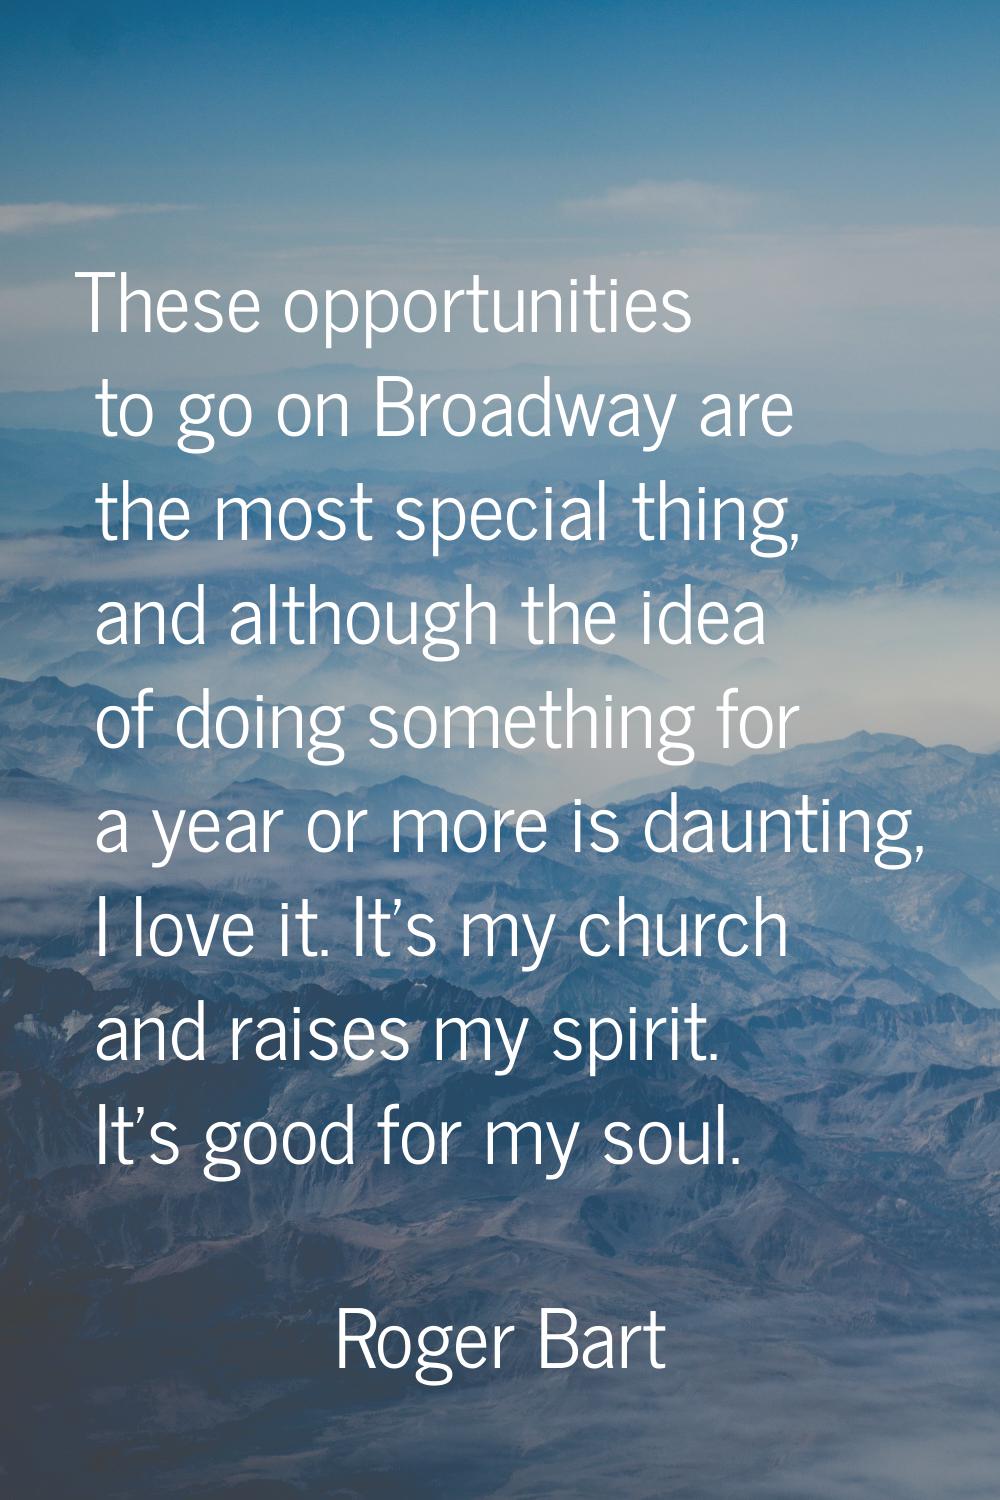 These opportunities to go on Broadway are the most special thing, and although the idea of doing so